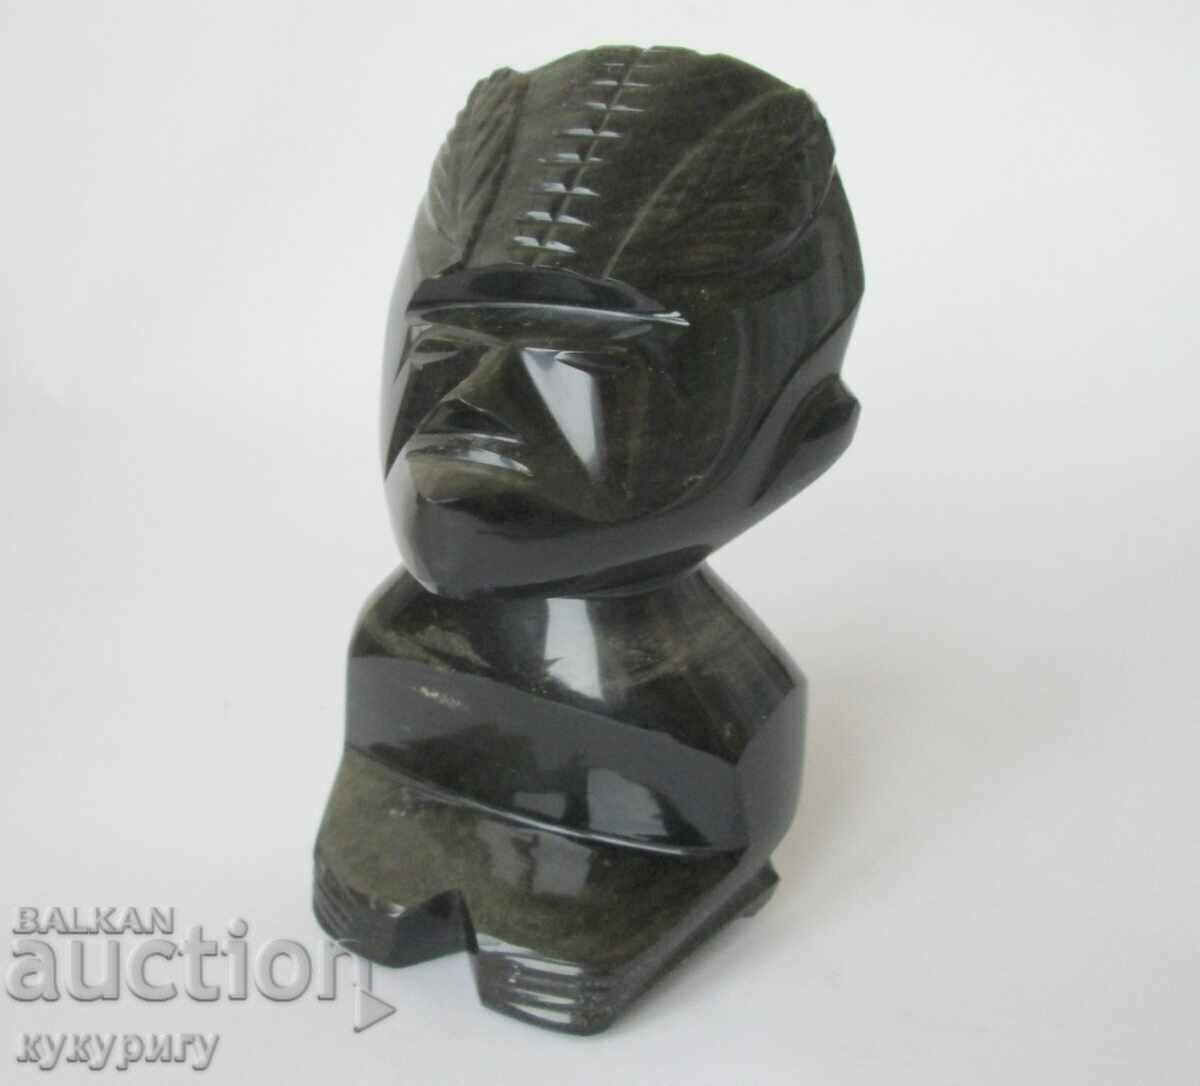 Old statuette figure mask deity from the mineral Obsidian